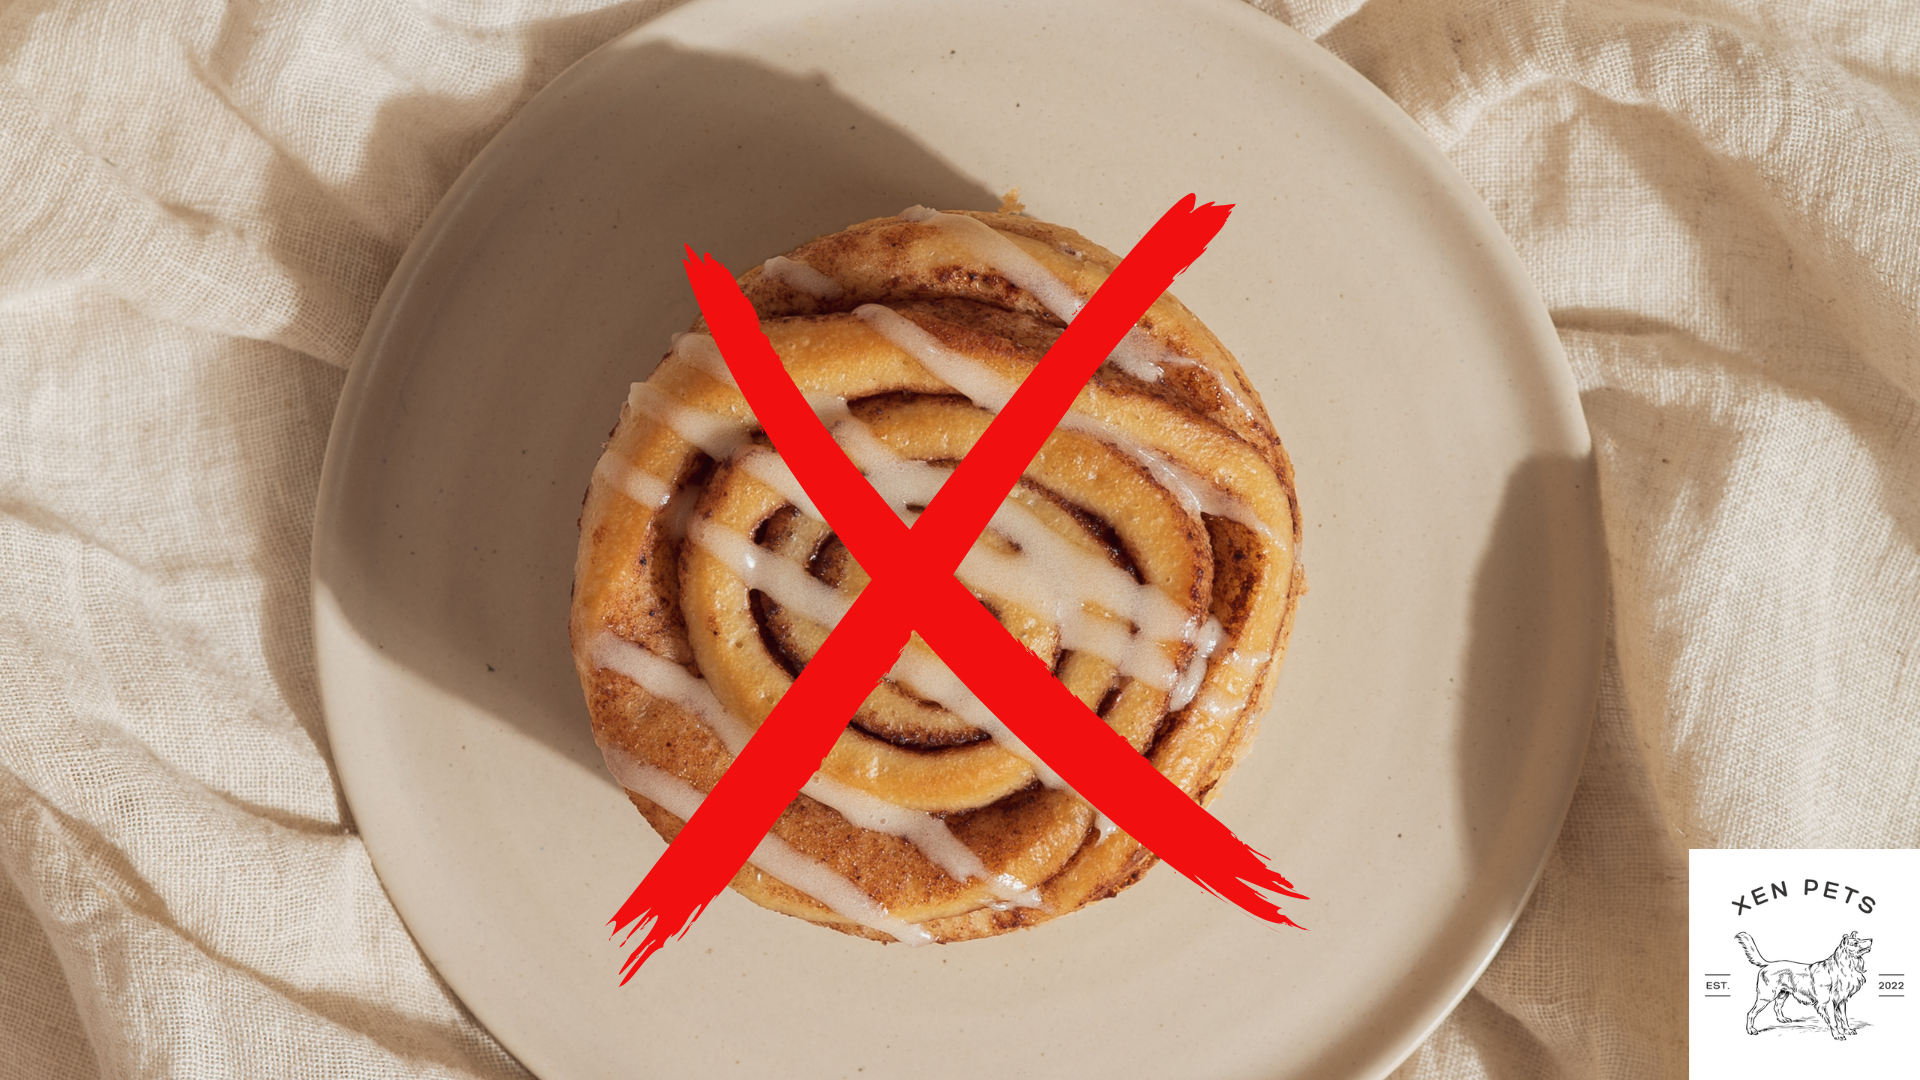 Do not give dogs cinnamon rolls